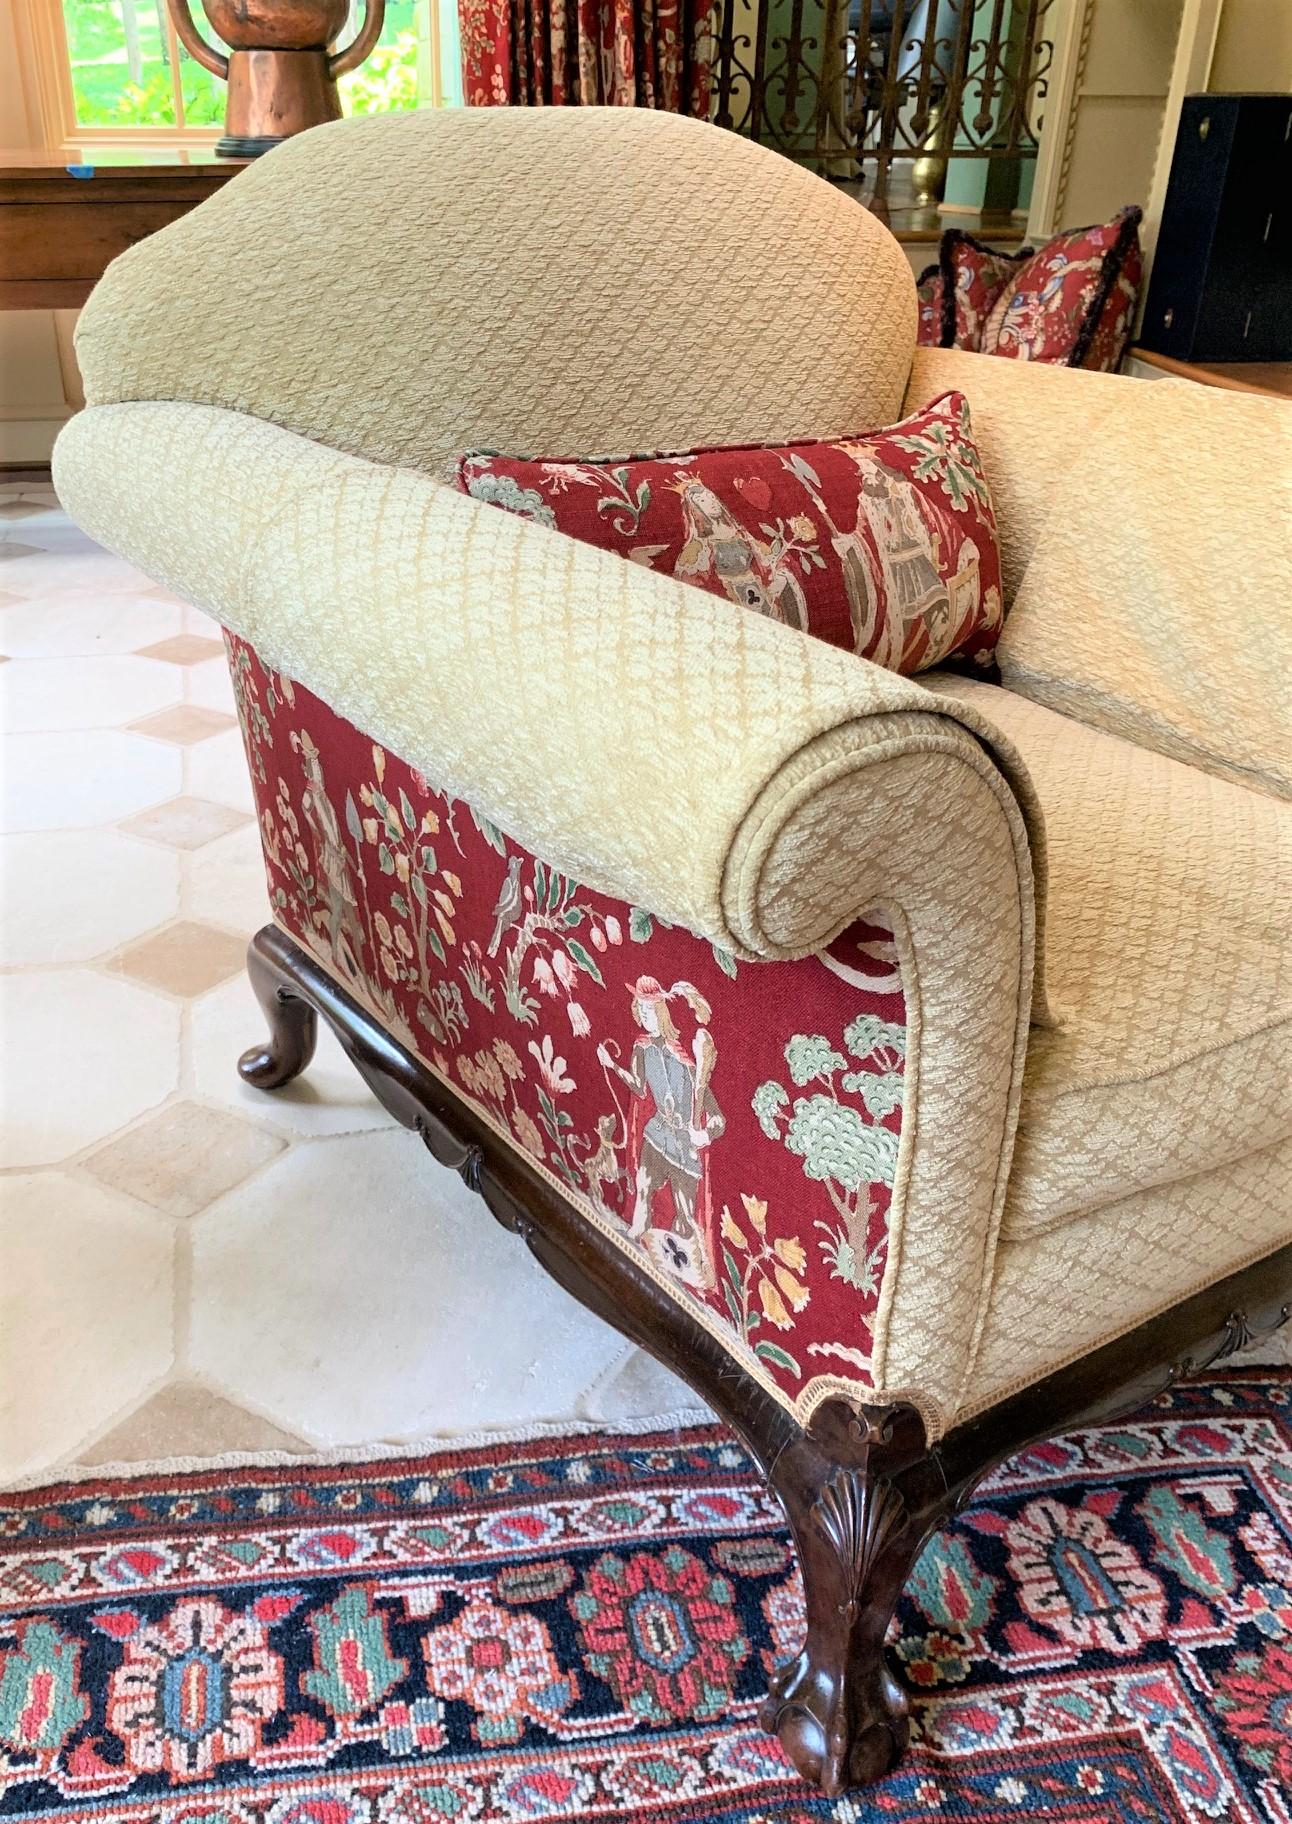 Remarkable pair of antique roll-arm mahogany club chairs or bergeres crafted in the English Chippendale styling. Highlighting colorful upholstery panels depicting flowering landscapes with Royalty and a variety of wildlife. The front legs with shell